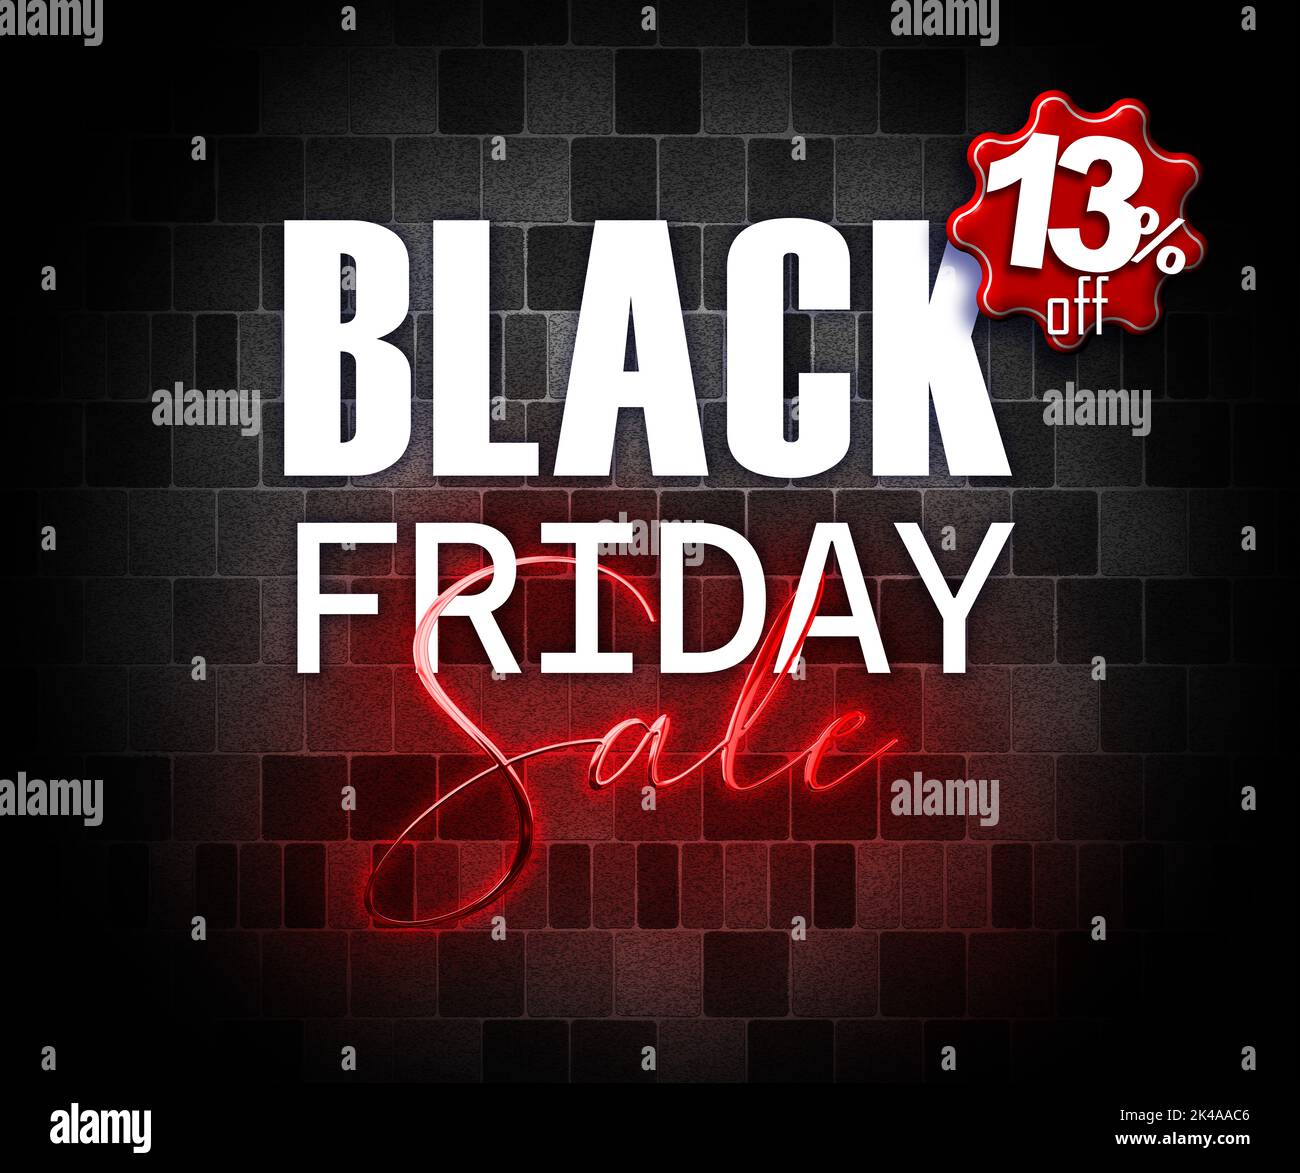 illustration with 3d elements black friday promotion banner 13 percent off sales increase Stock Photo